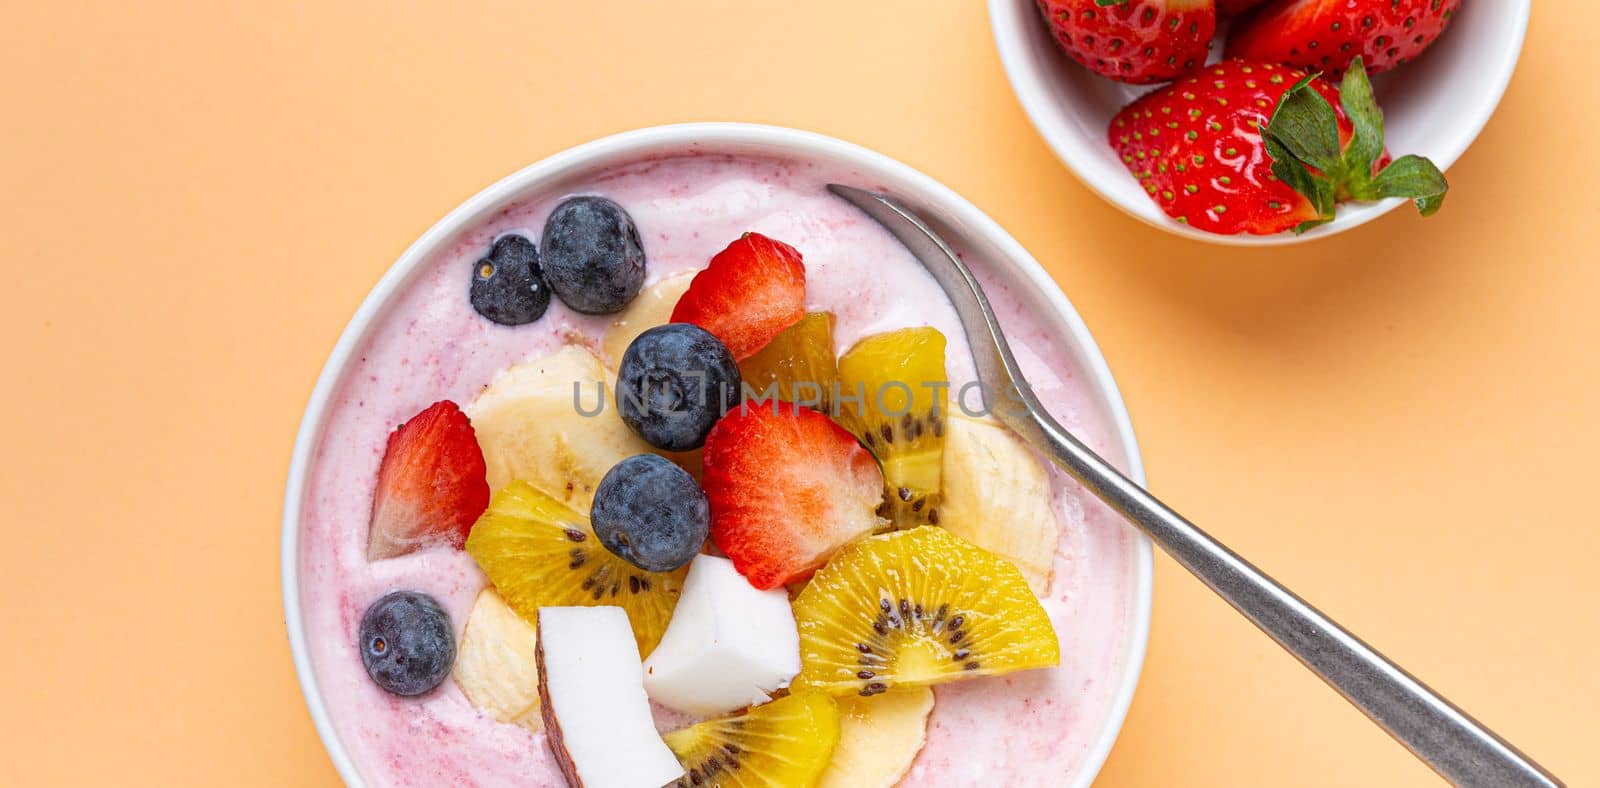 Healthy breakfast or dessert yogurt bowl with fresh banana, strawberry, blueberry, cocos, kiwi top view on minimal pastel paper background with spoon